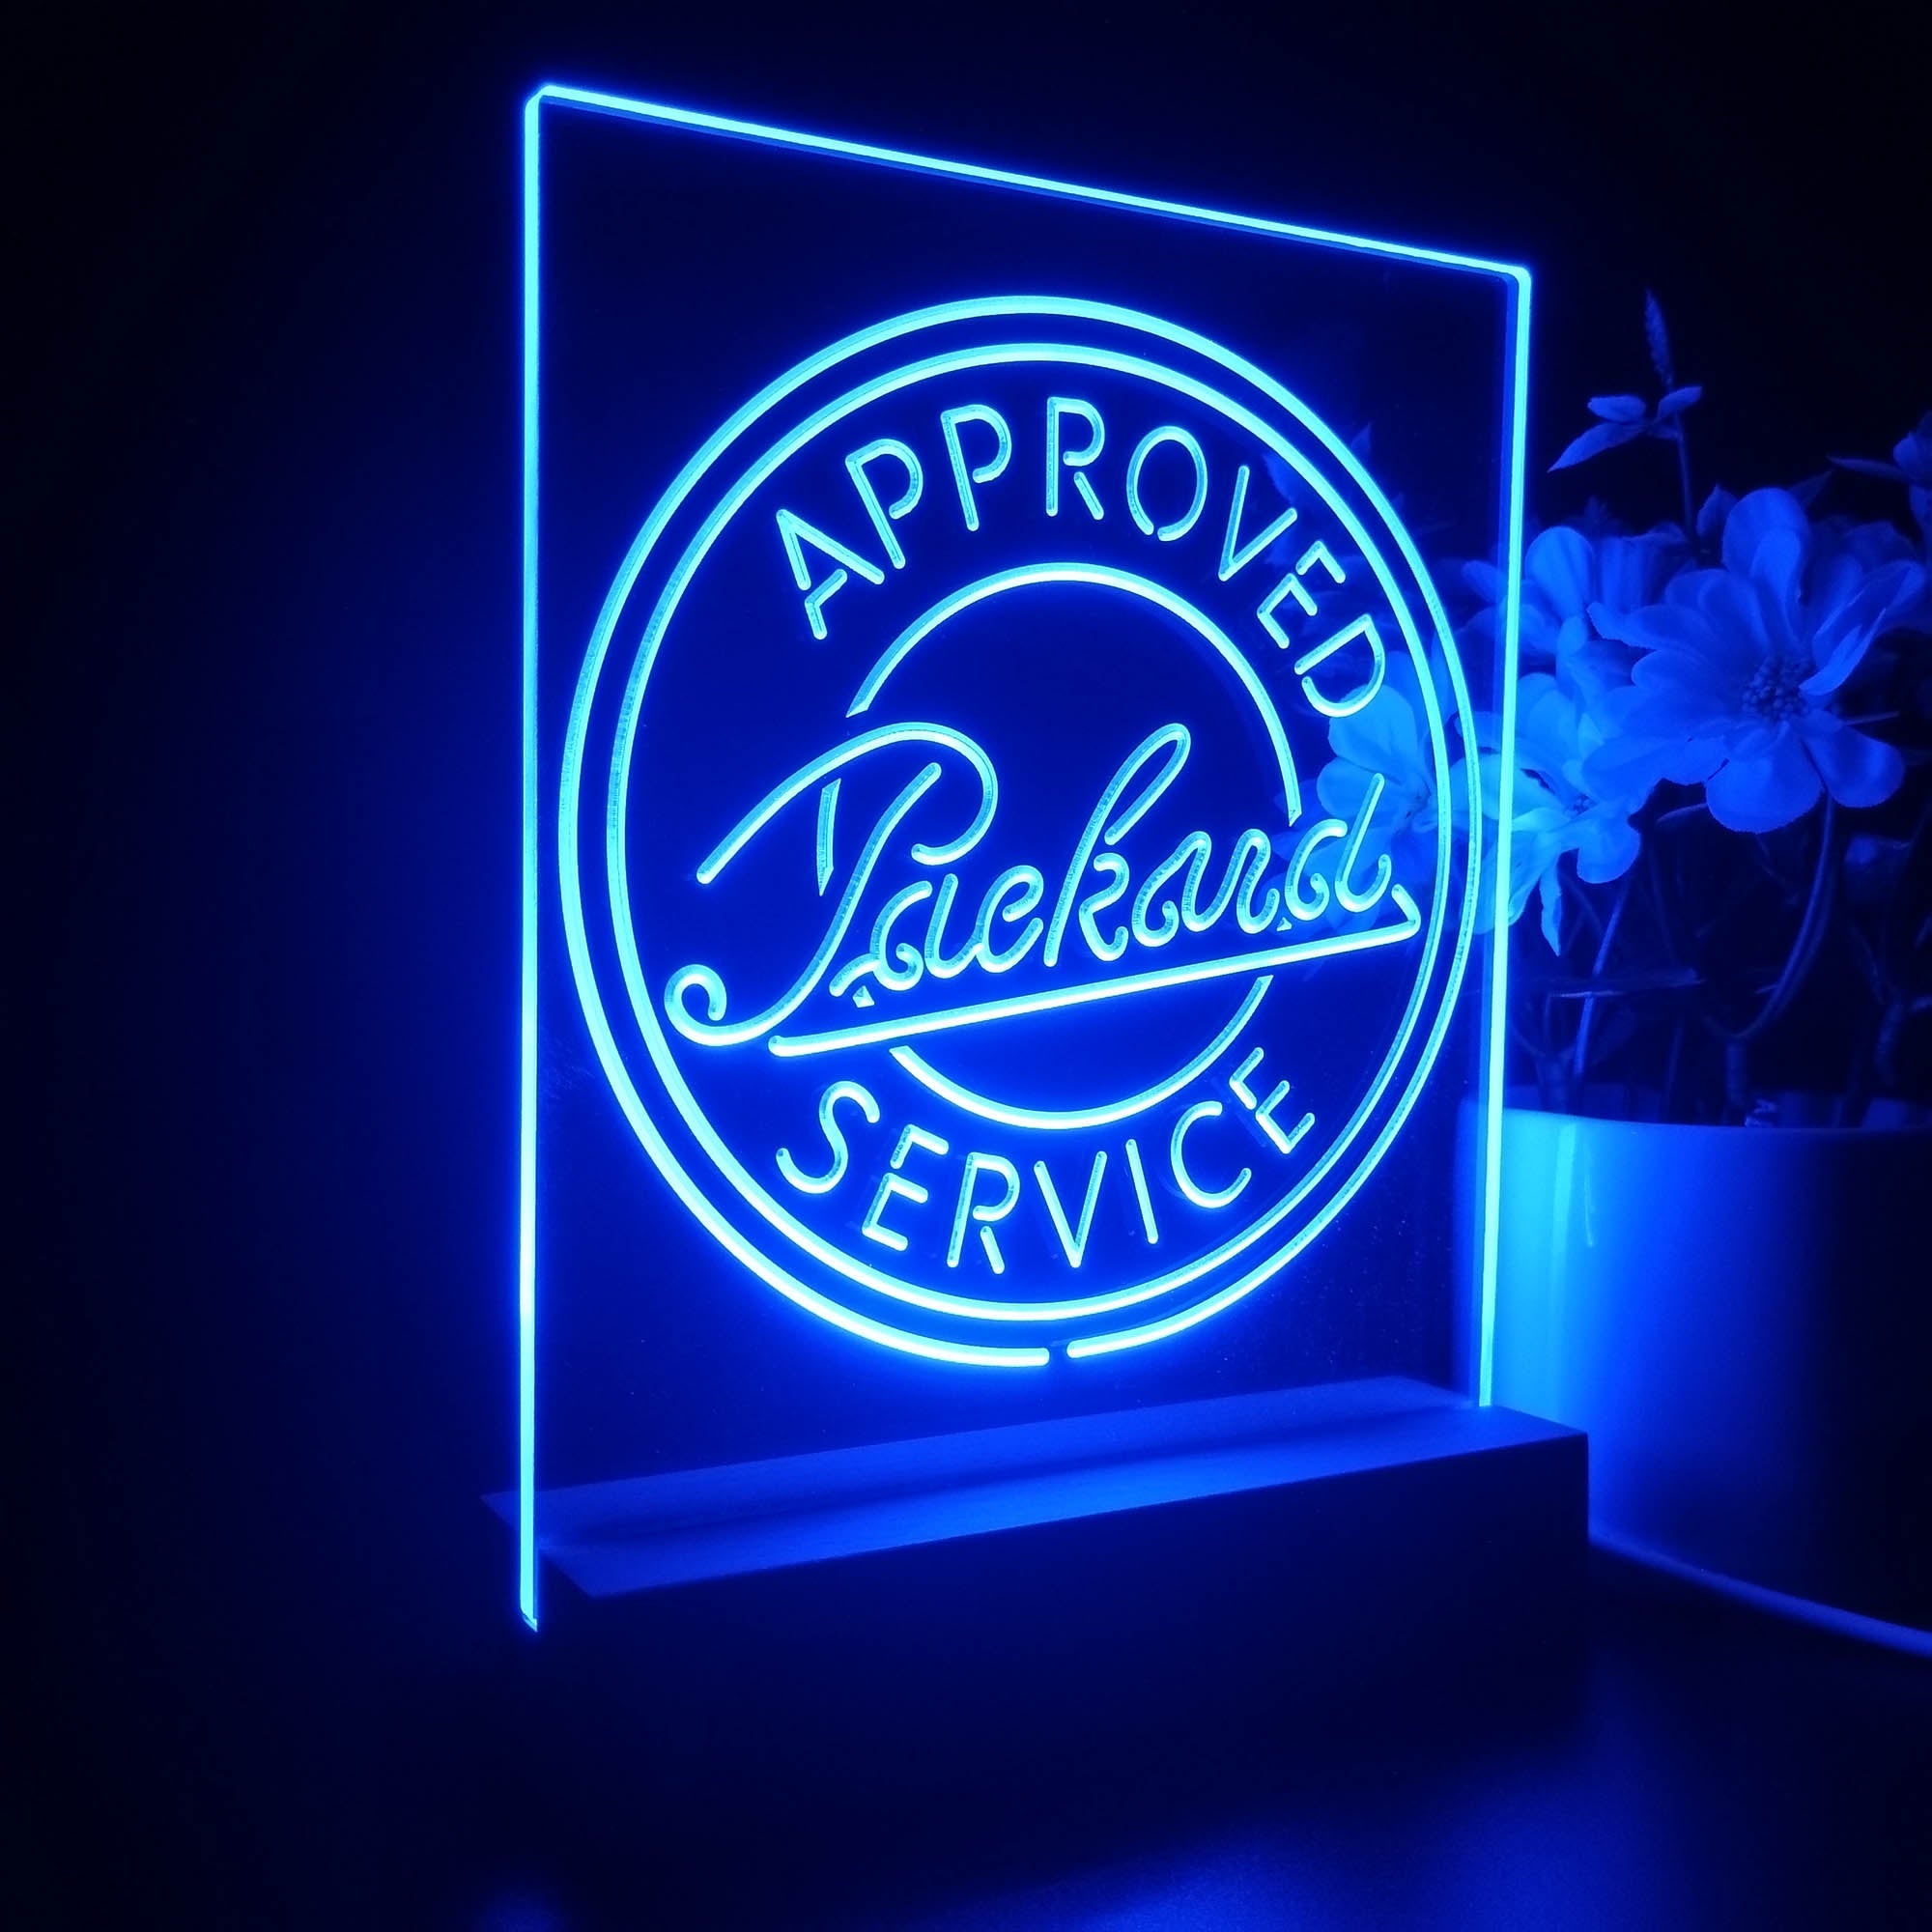 Approved Packard Service Garage Night Light LED Sign